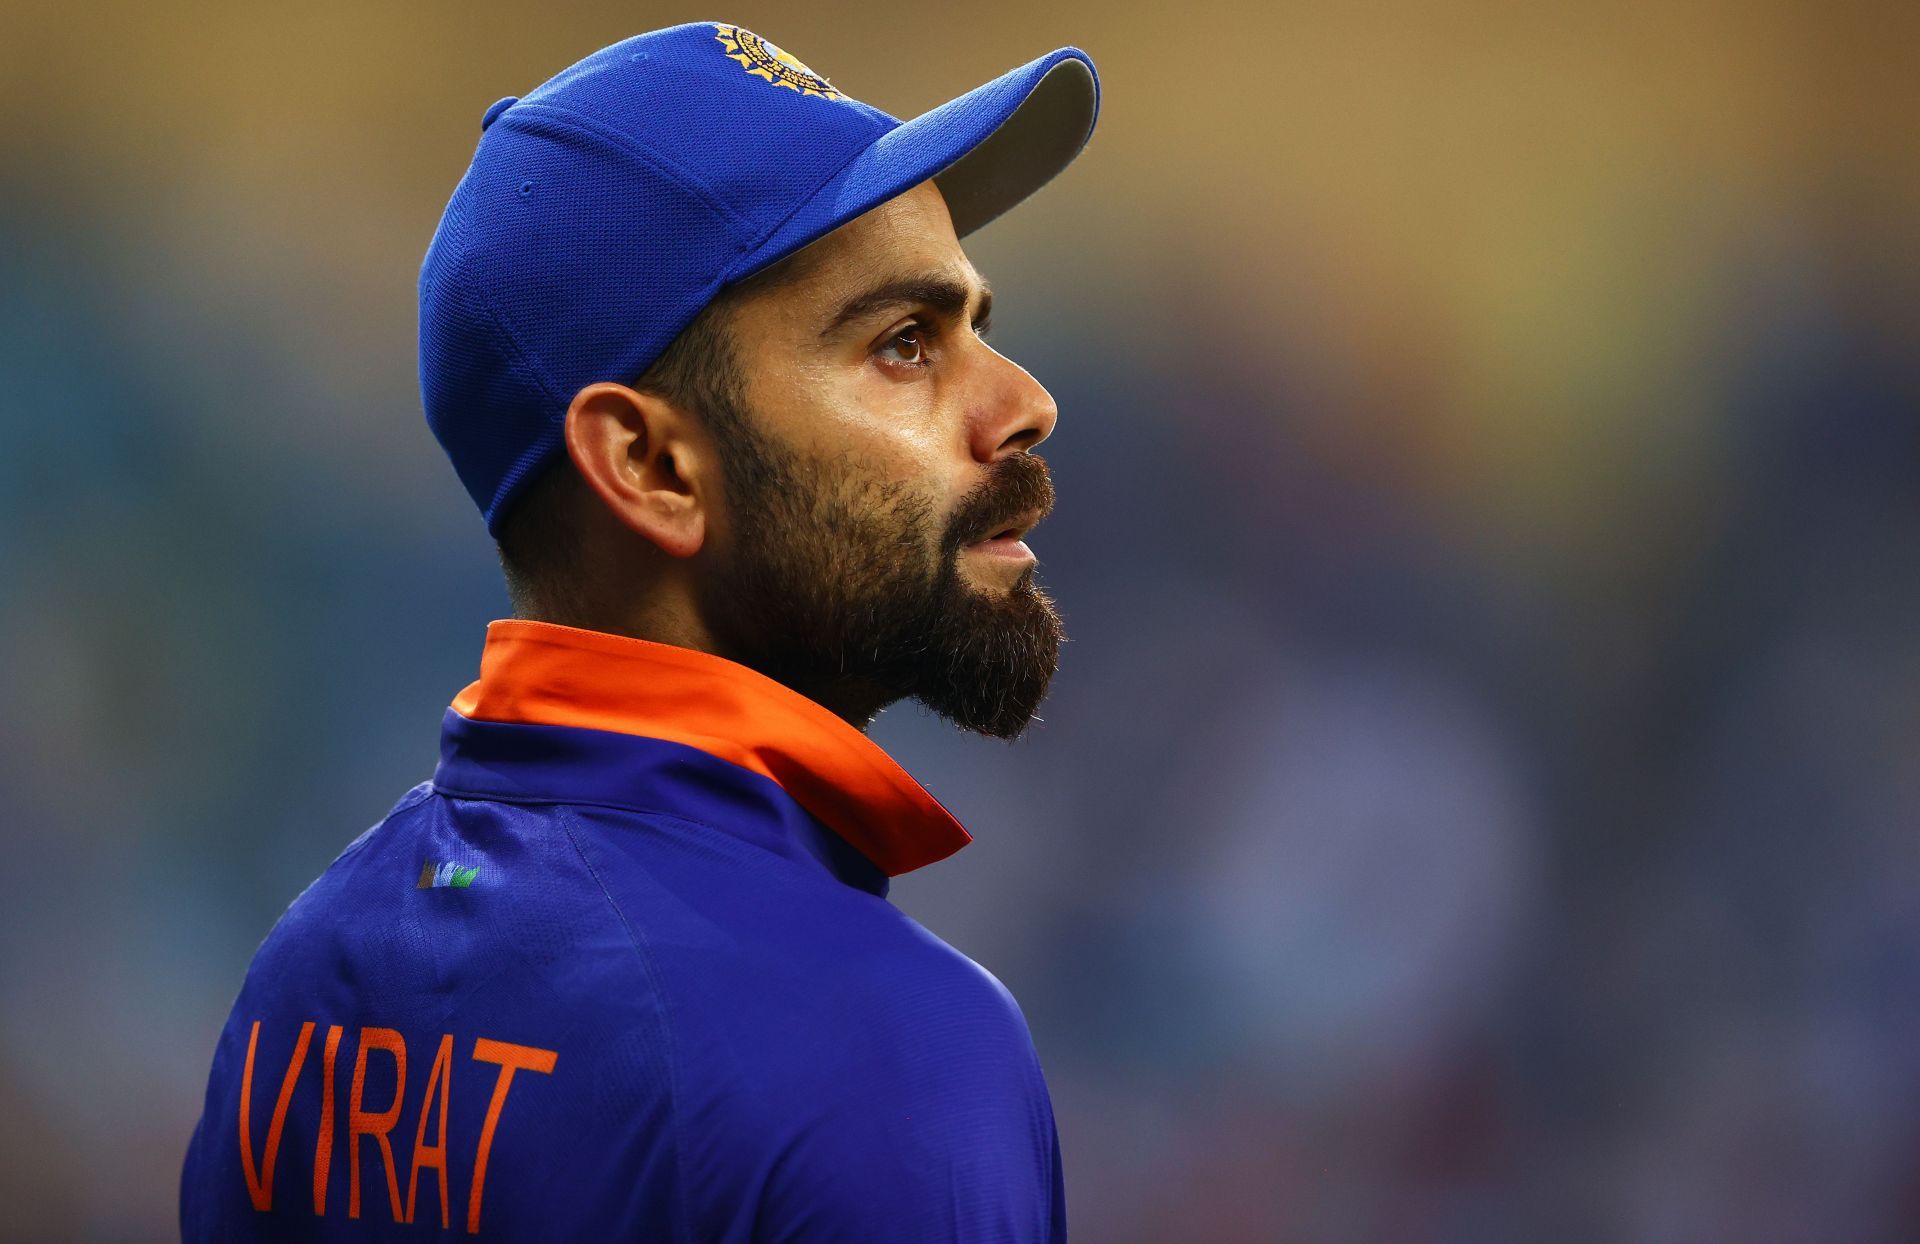 Virat Kohli will step down as T20I captain after the ICC T20 World Cup 2021 (Credit: Getty Images).